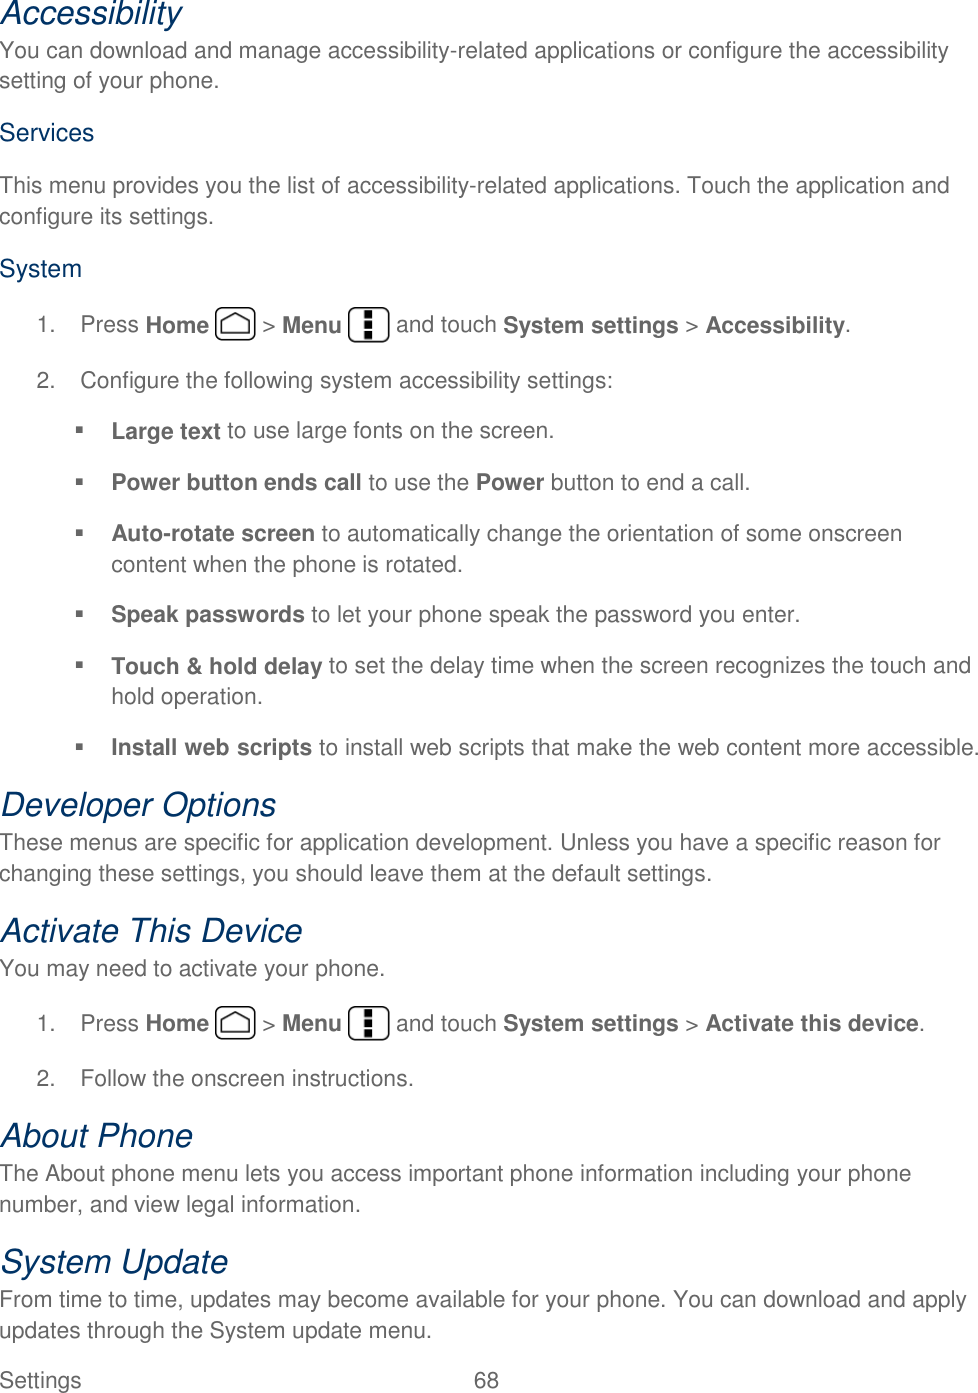  Settings  68   Accessibility You can download and manage accessibility-related applications or configure the accessibility setting of your phone.  Services This menu provides you the list of accessibility-related applications. Touch the application and configure its settings. System 1.  Press Home   &gt; Menu   and touch System settings &gt; Accessibility. 2.  Configure the following system accessibility settings:  Large text to use large fonts on the screen.  Power button ends call to use the Power button to end a call.  Auto-rotate screen to automatically change the orientation of some onscreen content when the phone is rotated.  Speak passwords to let your phone speak the password you enter.  Touch &amp; hold delay to set the delay time when the screen recognizes the touch and hold operation.  Install web scripts to install web scripts that make the web content more accessible. Developer Options These menus are specific for application development. Unless you have a specific reason for changing these settings, you should leave them at the default settings. Activate This Device You may need to activate your phone.  1.  Press Home   &gt; Menu   and touch System settings &gt; Activate this device. 2.  Follow the onscreen instructions. About Phone The About phone menu lets you access important phone information including your phone number, and view legal information. System Update From time to time, updates may become available for your phone. You can download and apply updates through the System update menu. 